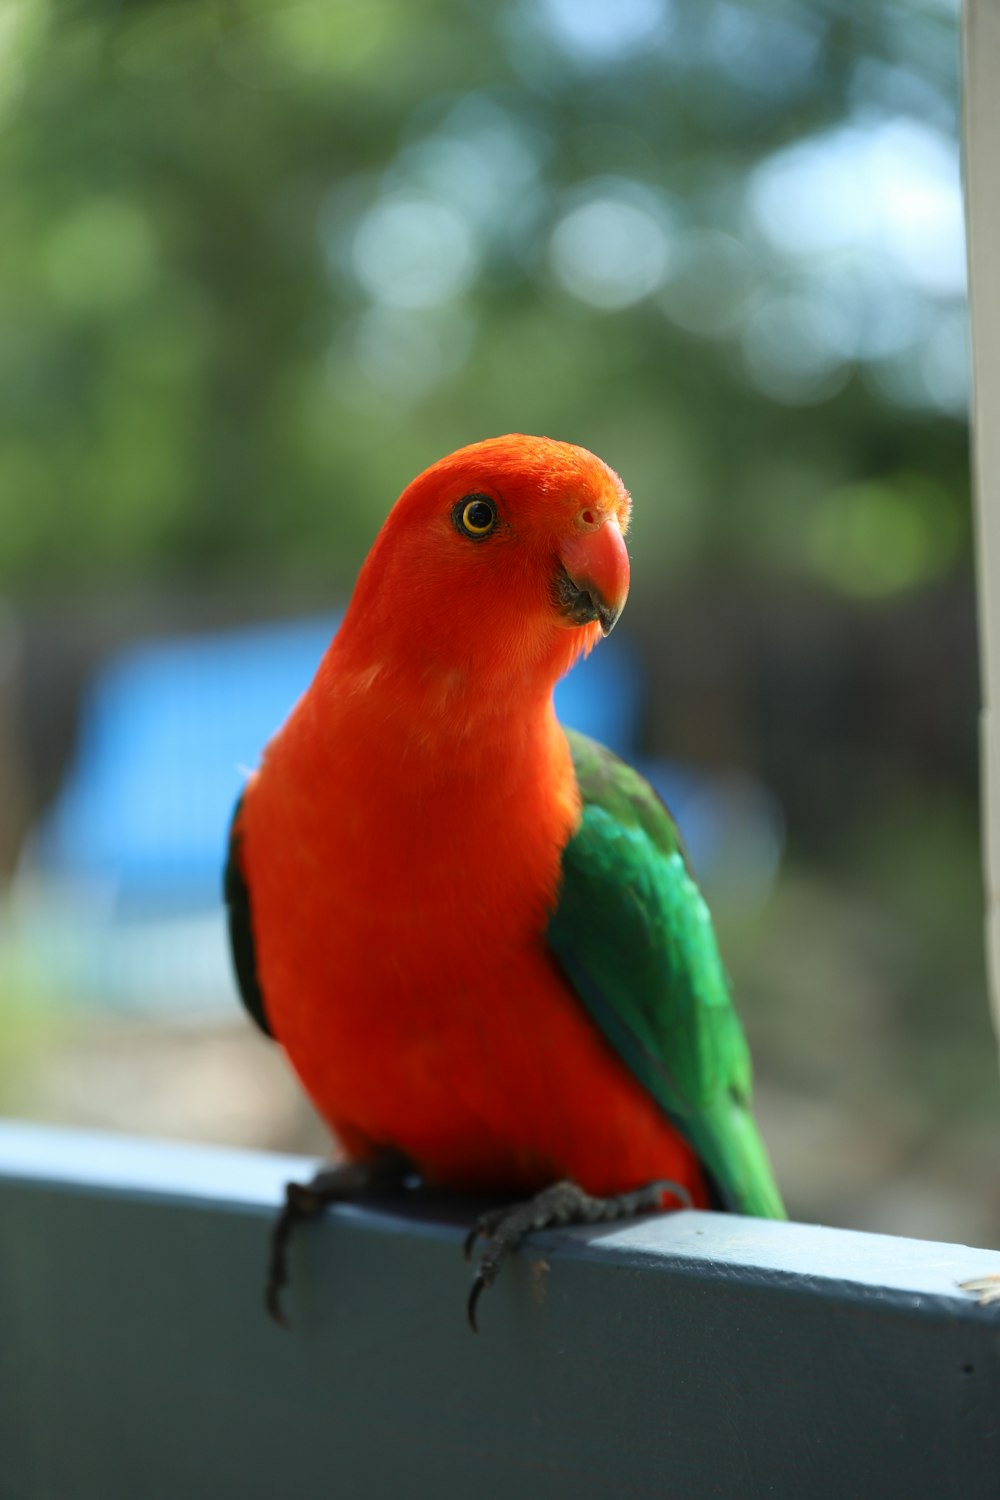 a red and green bird sitting on top of a window sill